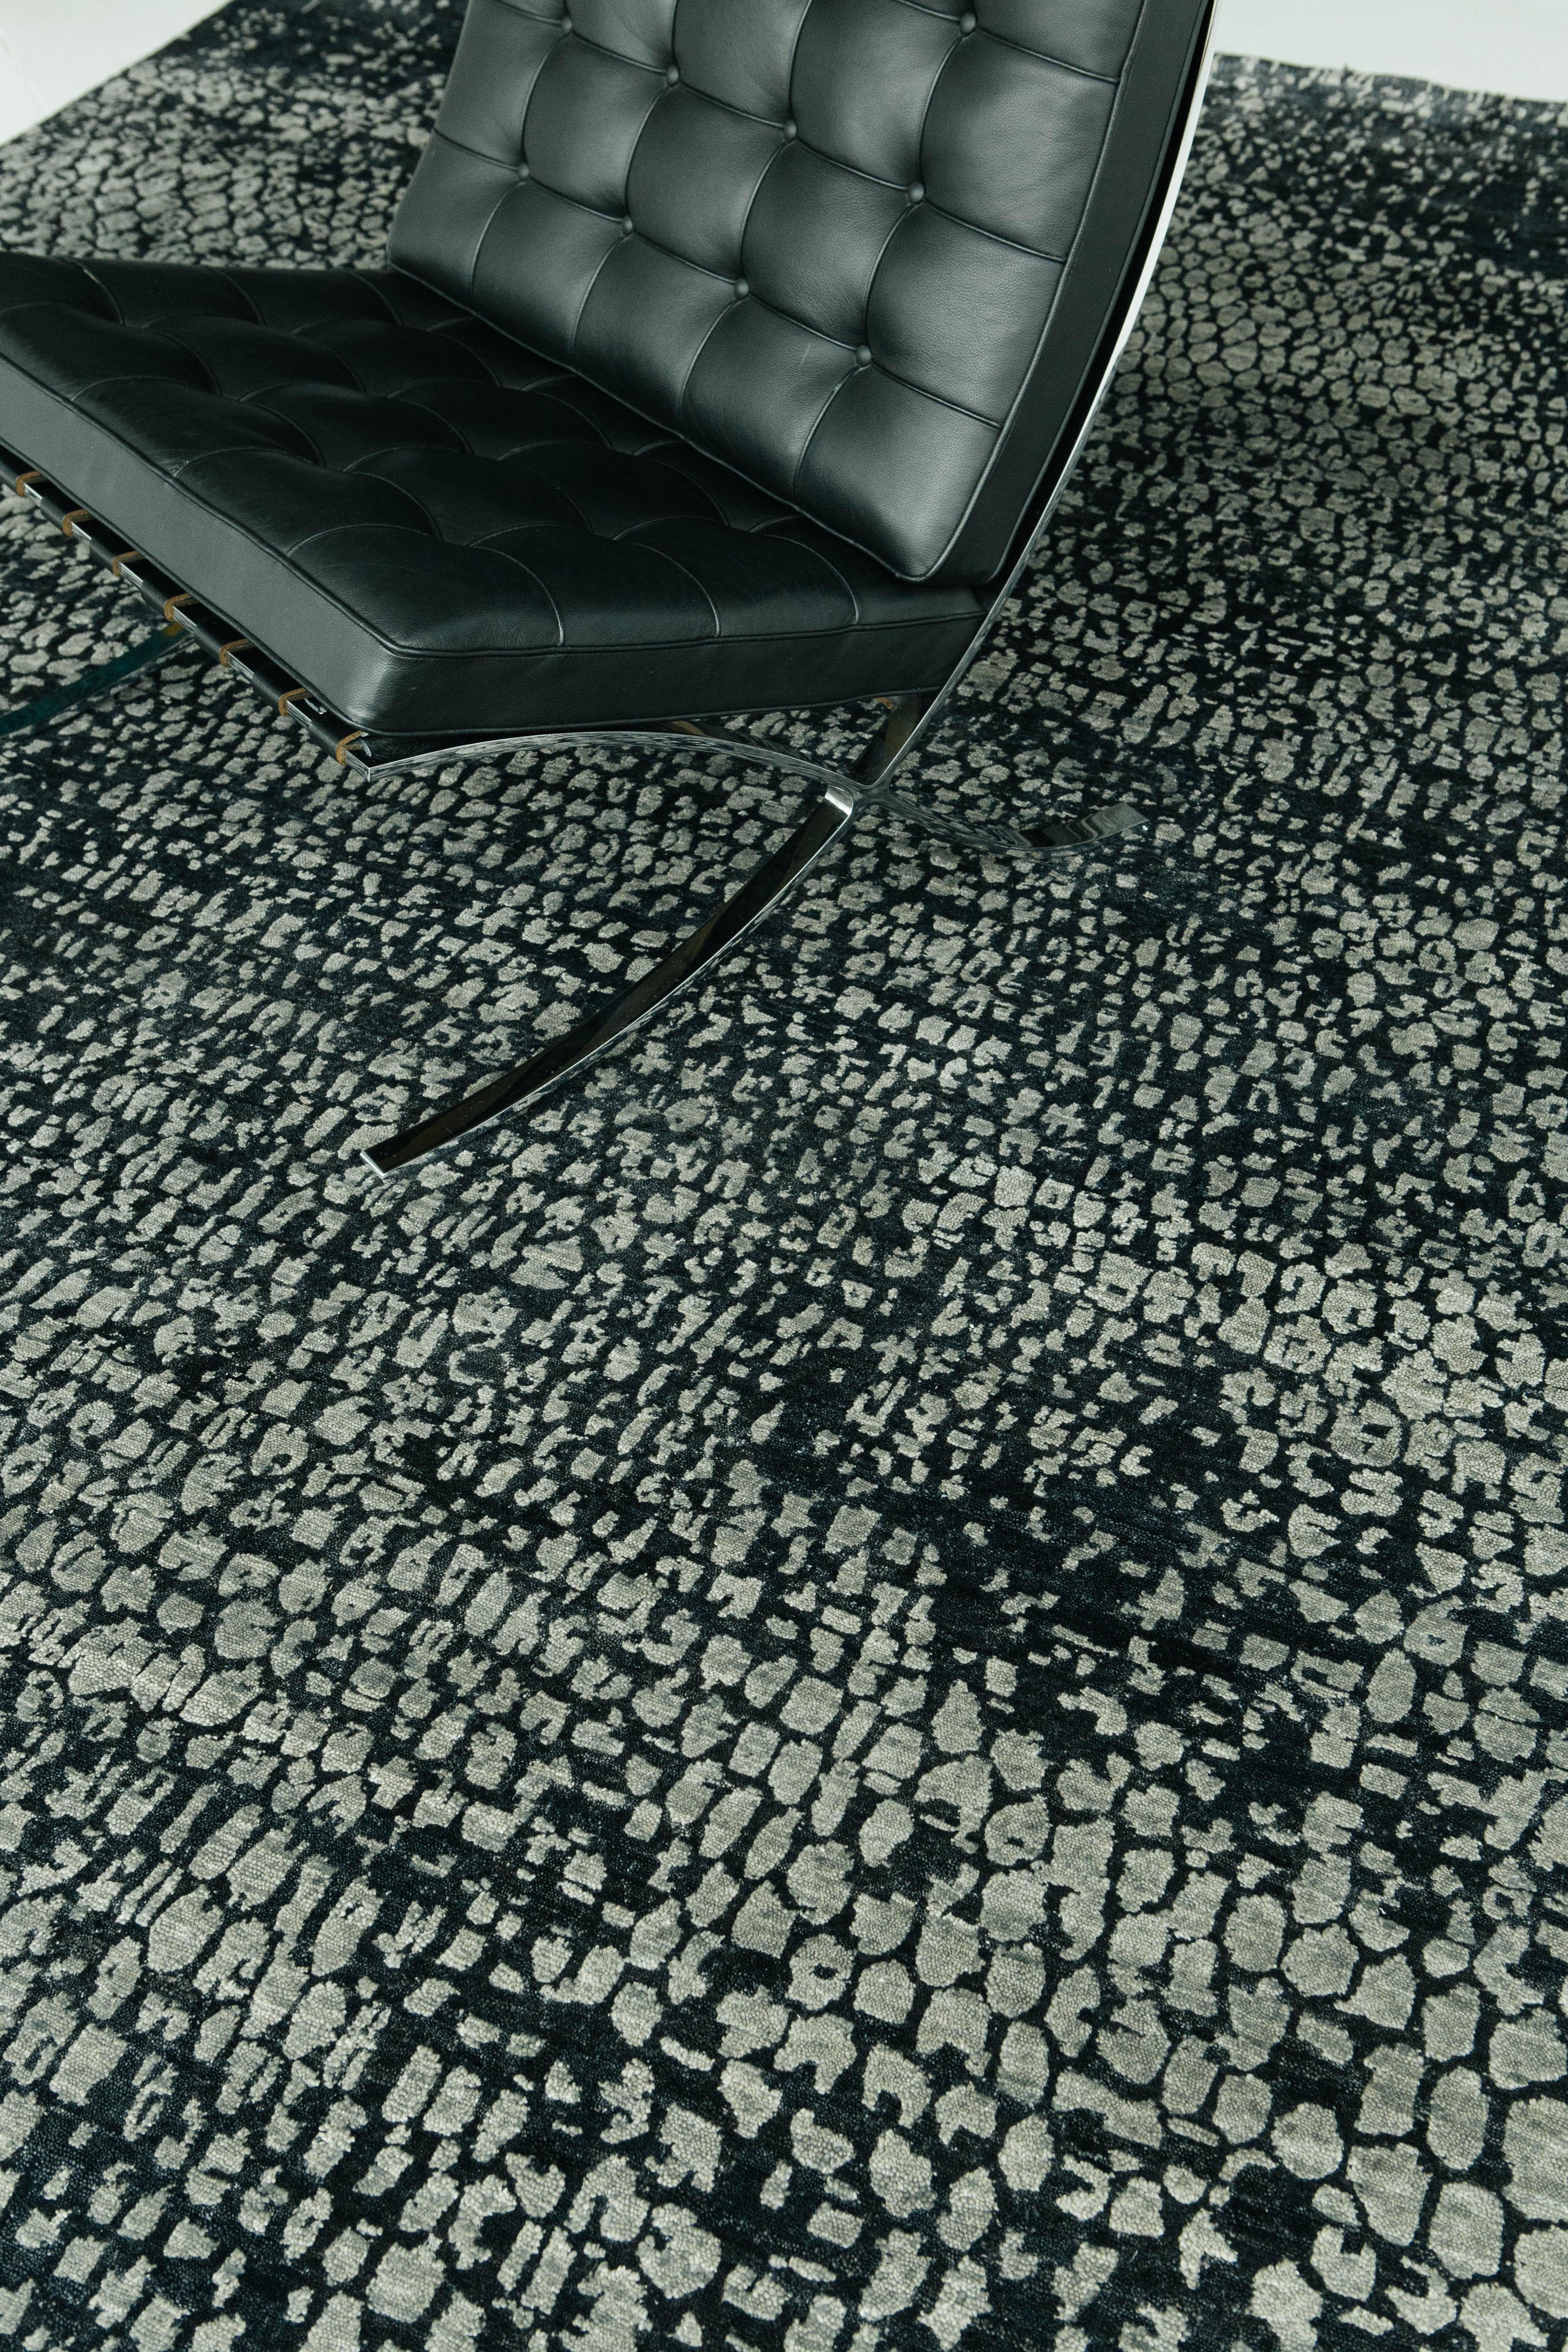 This unique piece from our Elan Collection identified by its deeply contrasting embossed design that is eye catching and unique. Its lustrous midnight blue and grays create scale-like shapes motifs that are timely and luxurious.

Rug Number